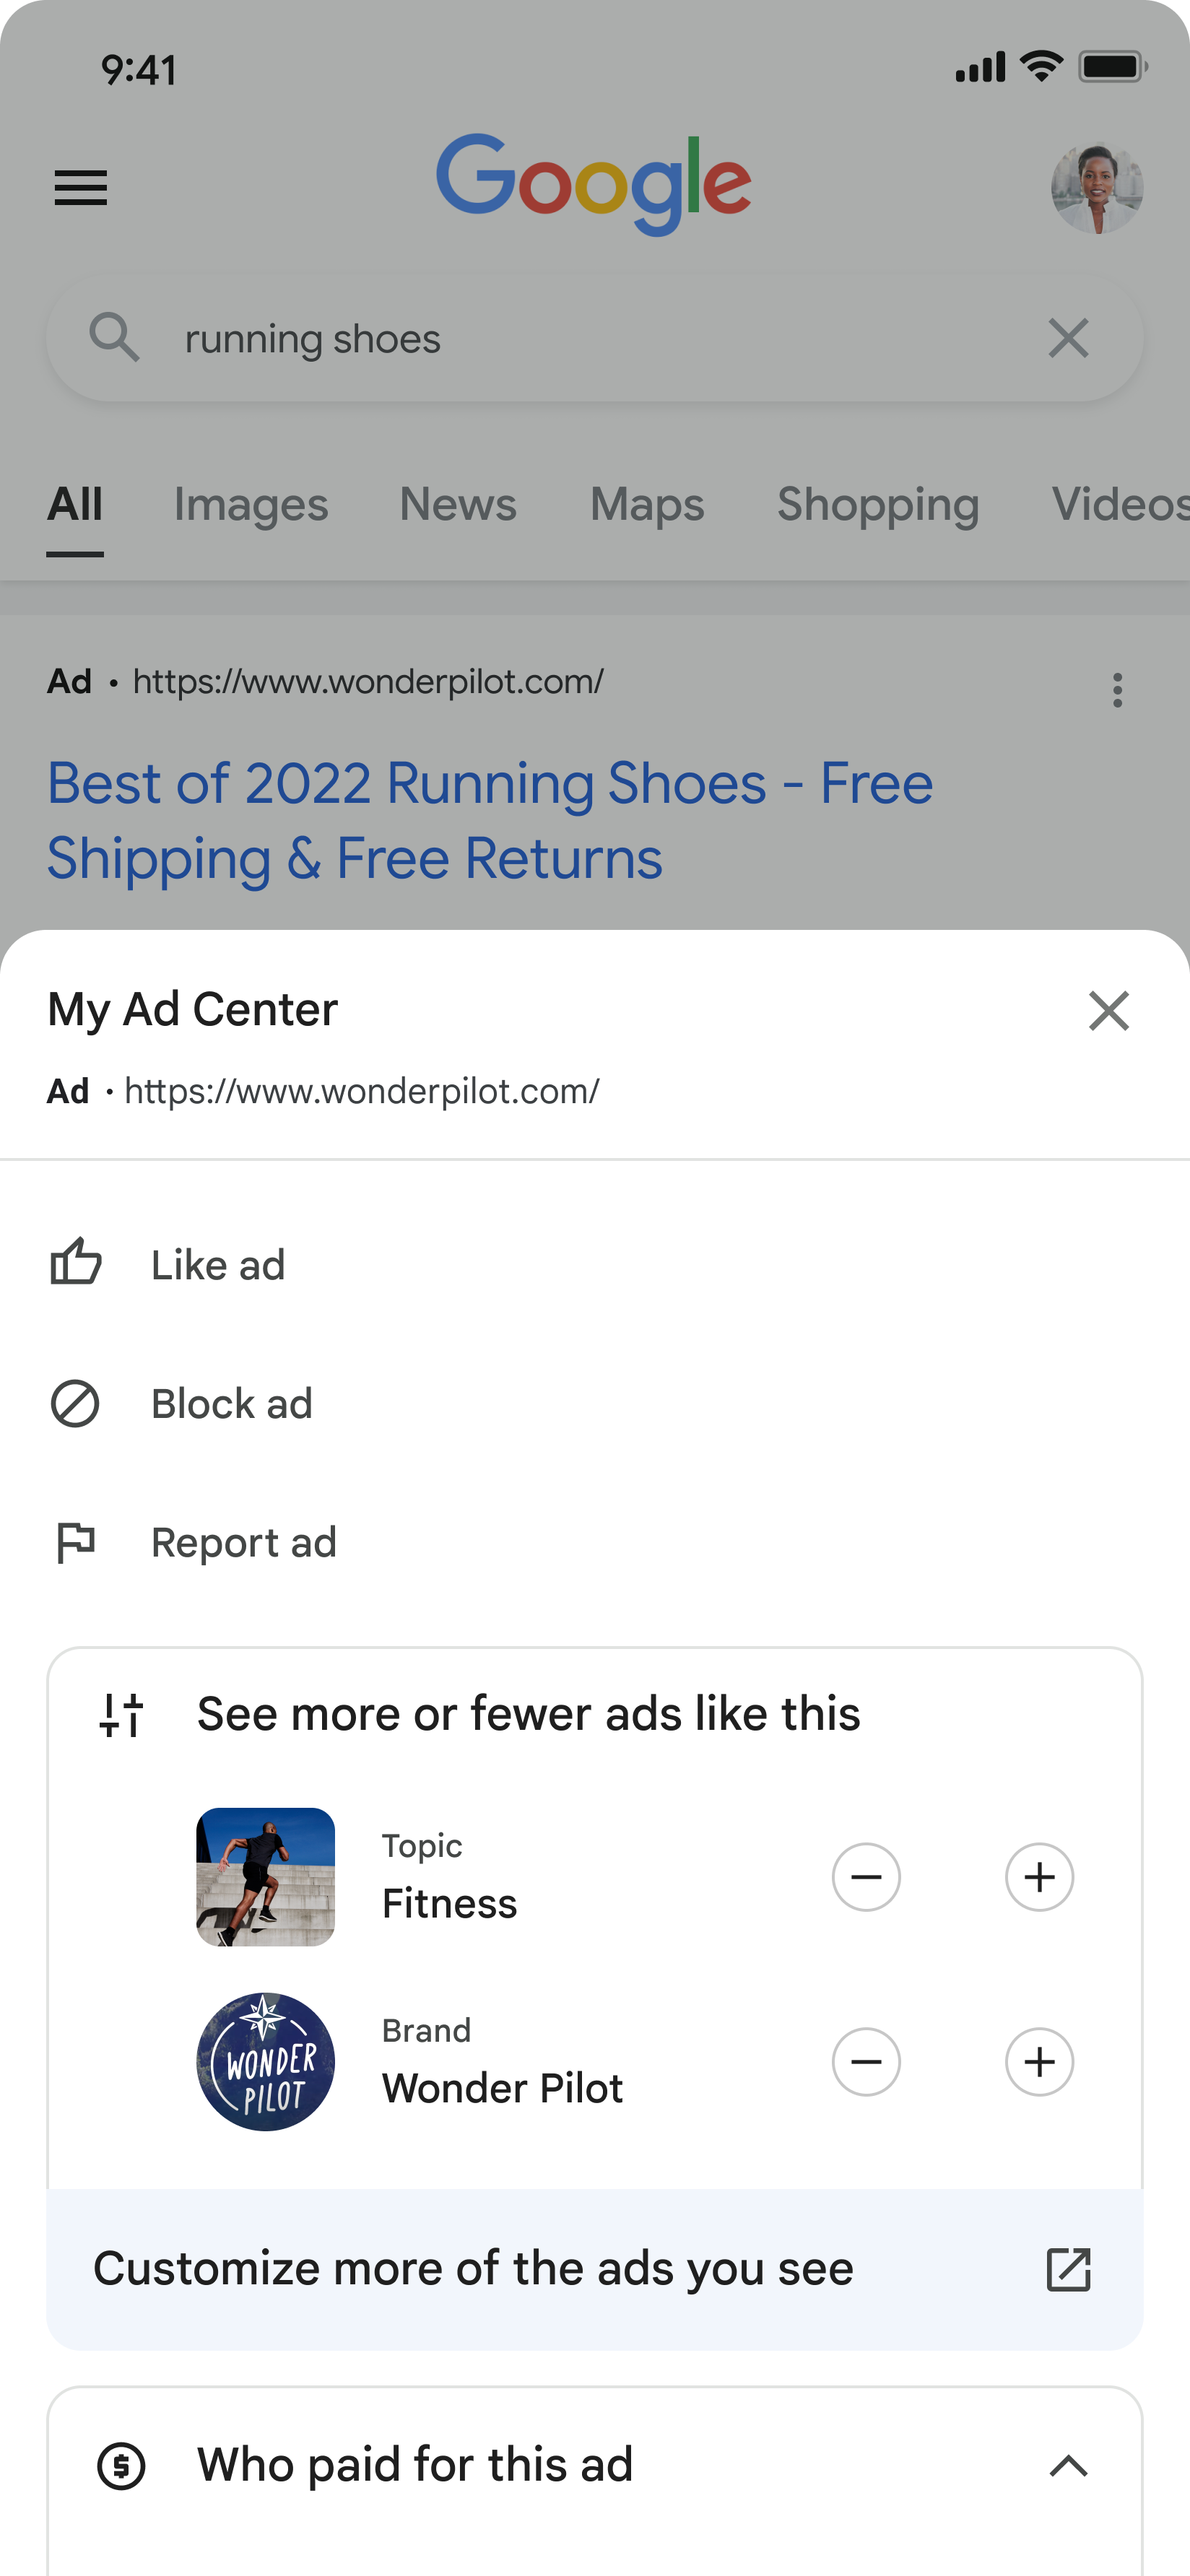 Controls within an ad